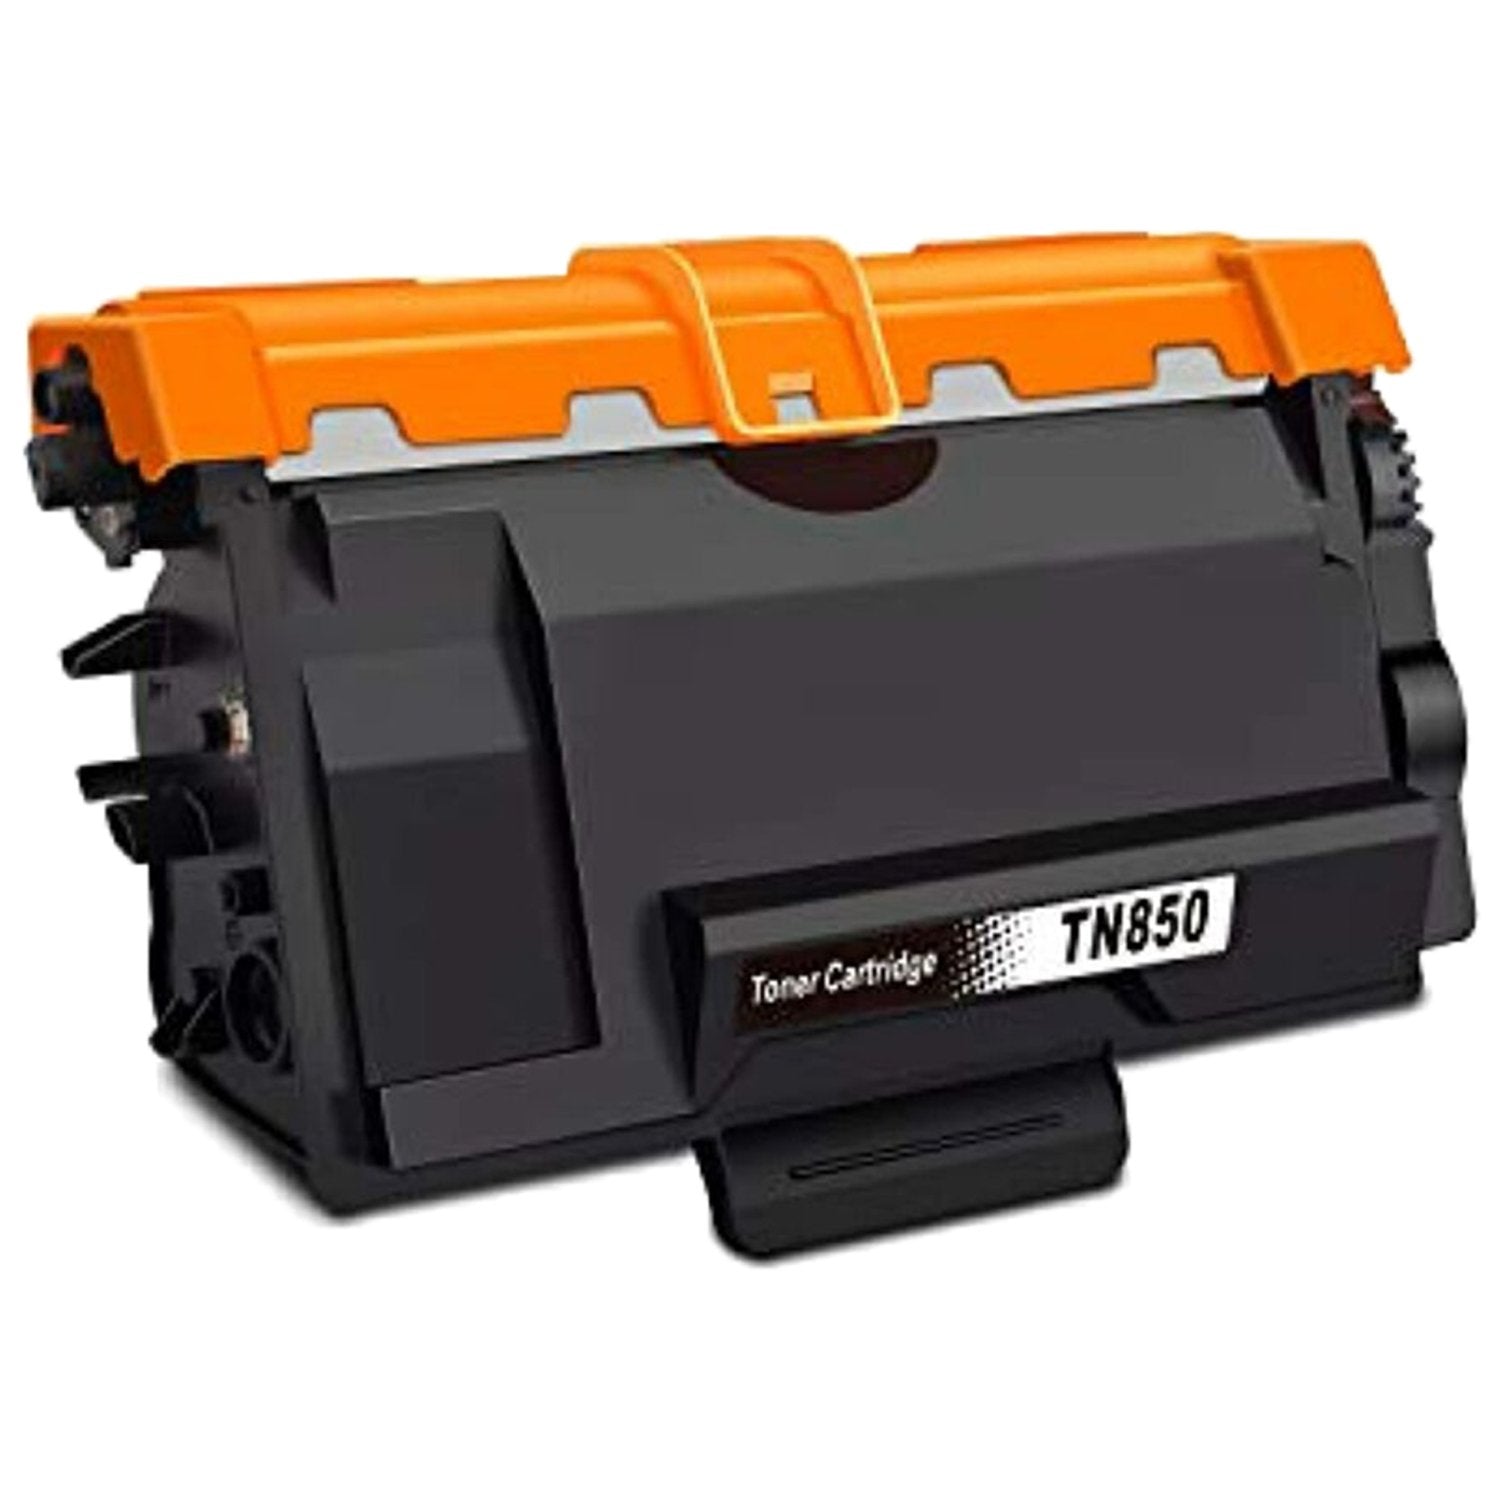 Absolute Toner Compatible Brother TN850 High Yield Black Toner Cartridge | Absolute Toner Brother Toner Cartridges